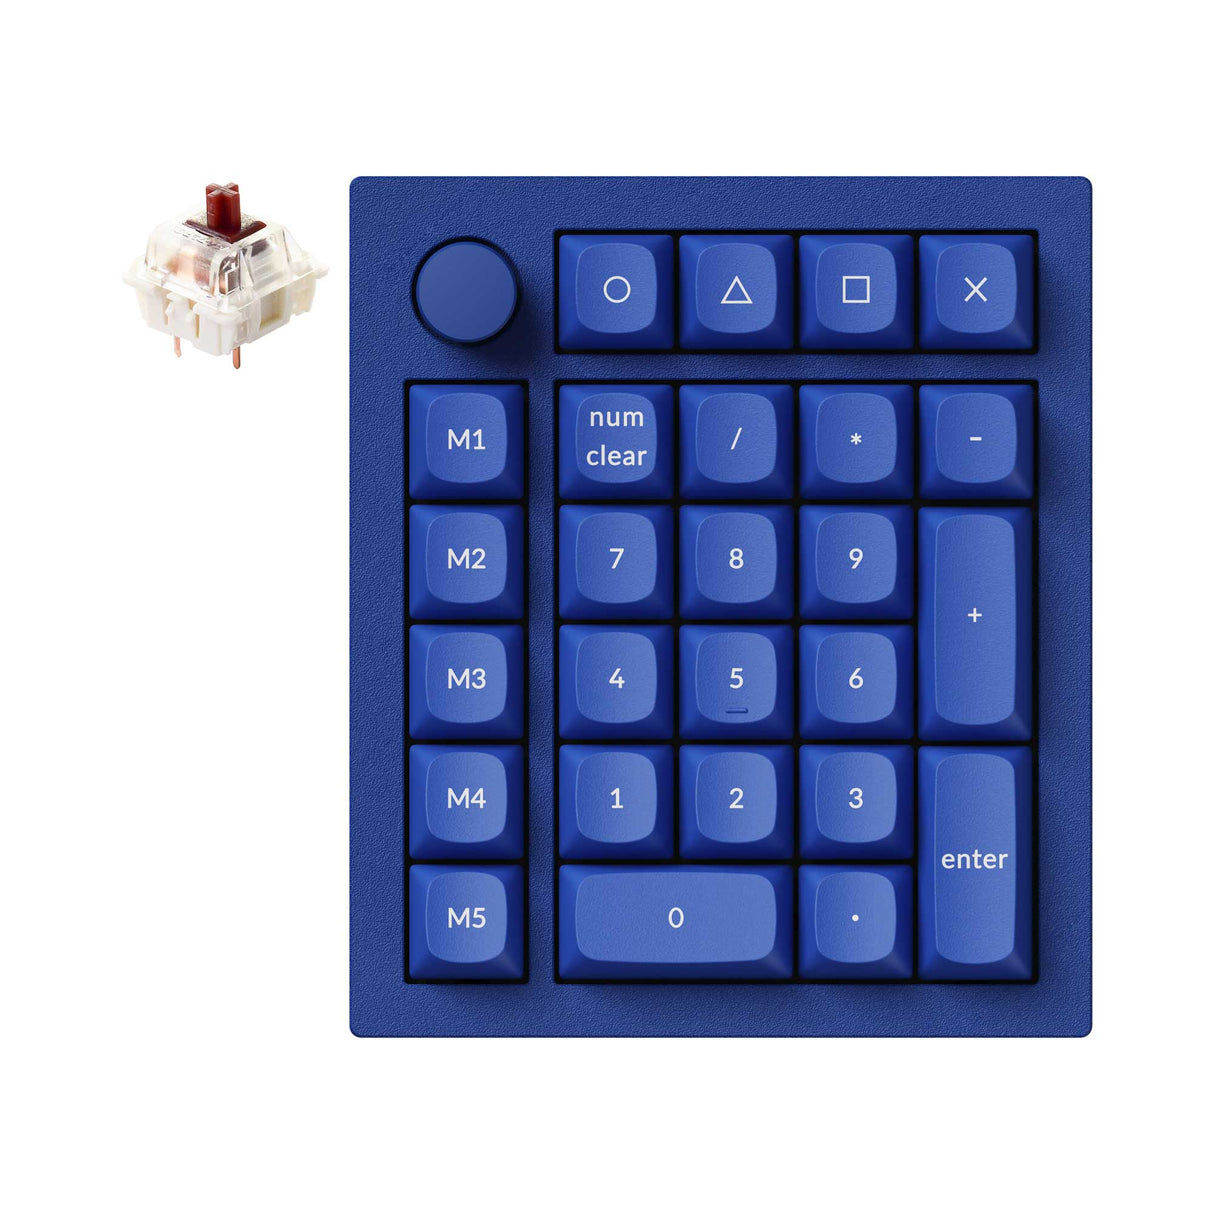 Keychron Q0 Plus QMK VIA custom number pad knob full aluminum blue frame for Mac Windows RGB backlight with hot swappable Gateron G Pro switch brown